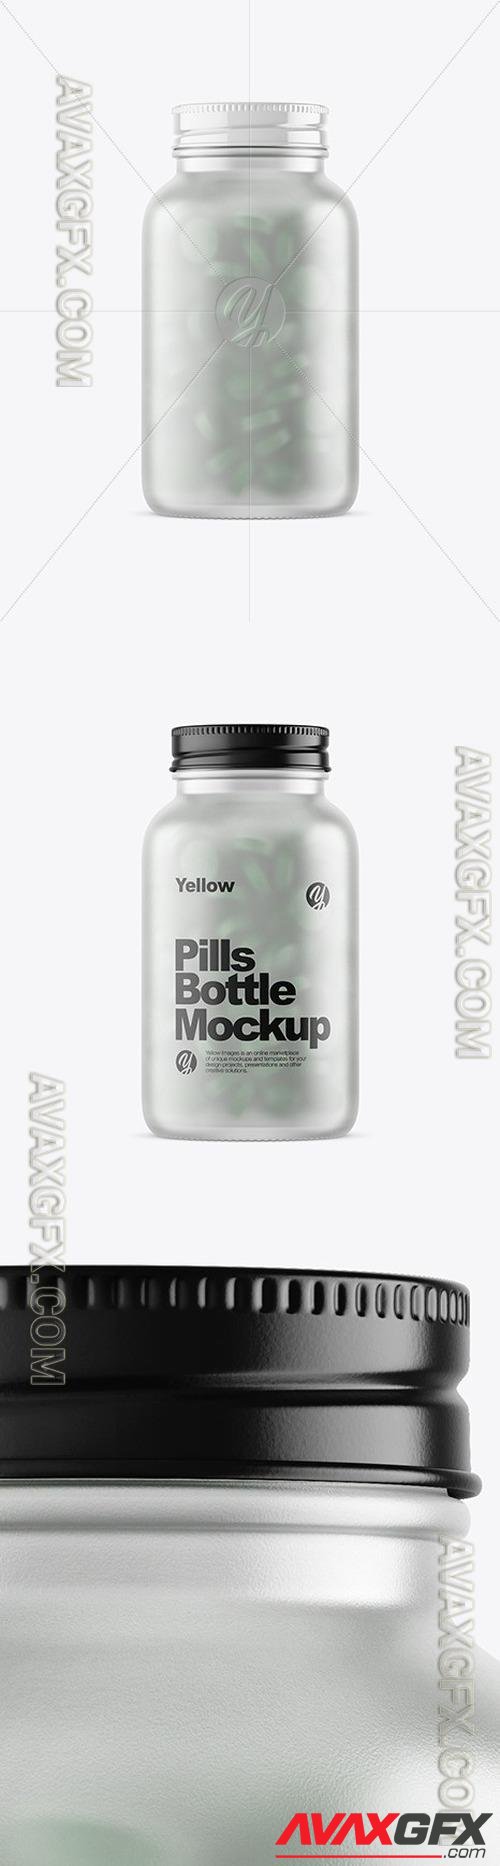 Frosted Glass Bottle With Pills Mockup 51650 TIF